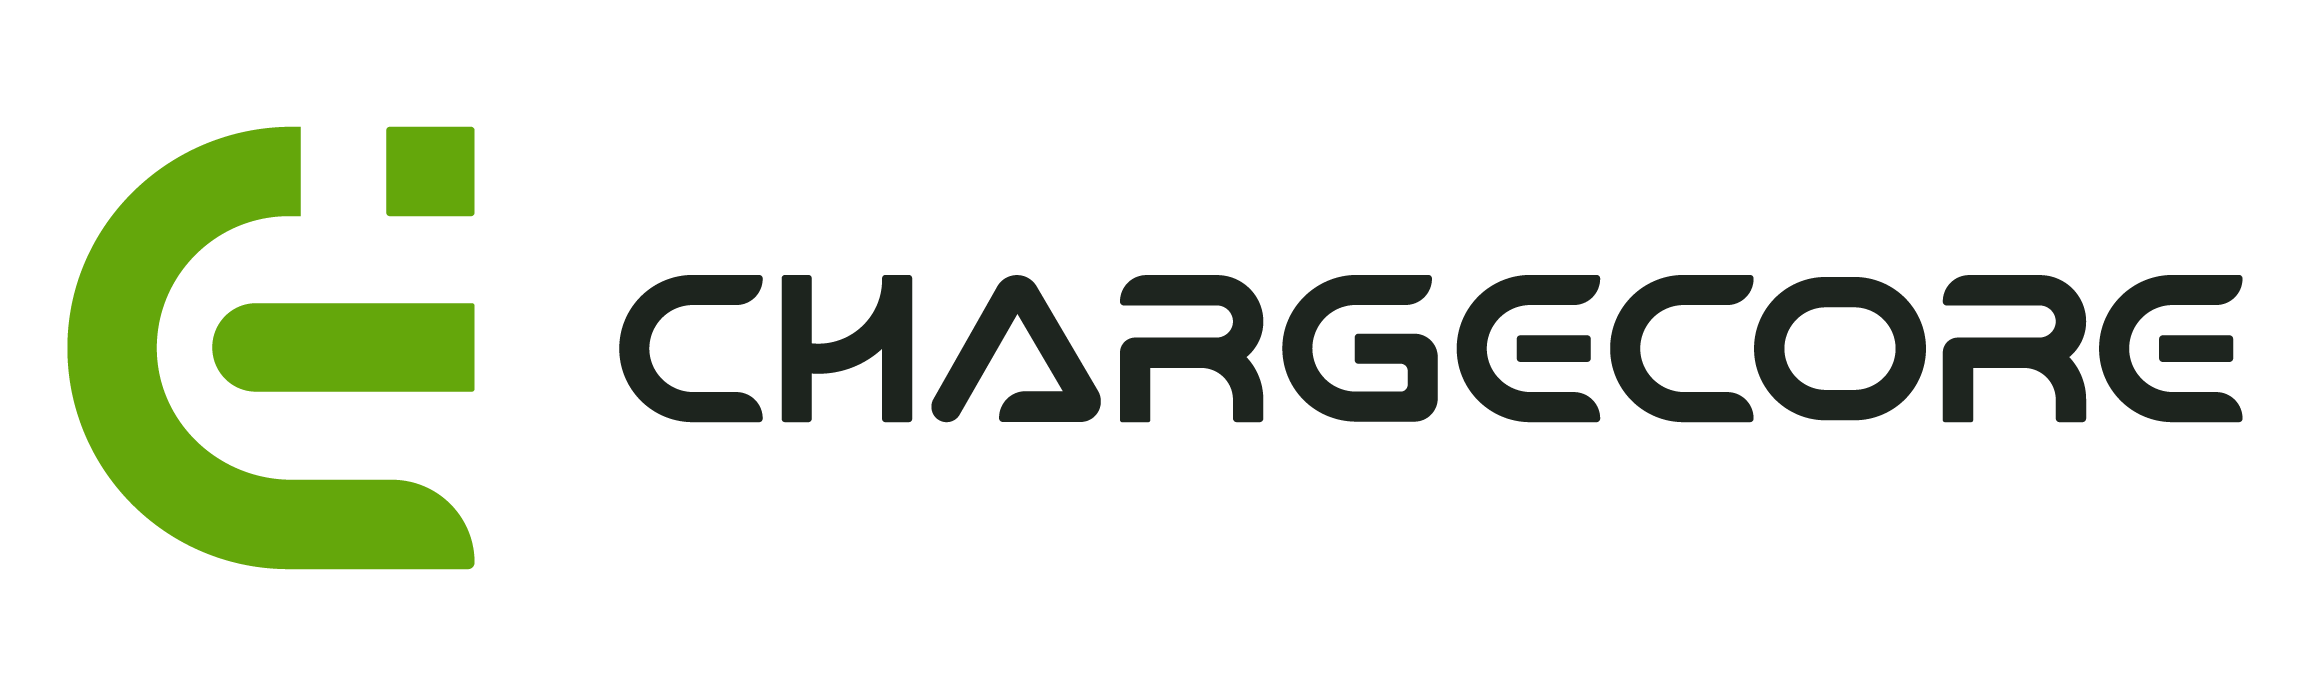 Chargecore Global Pte. Ltd.